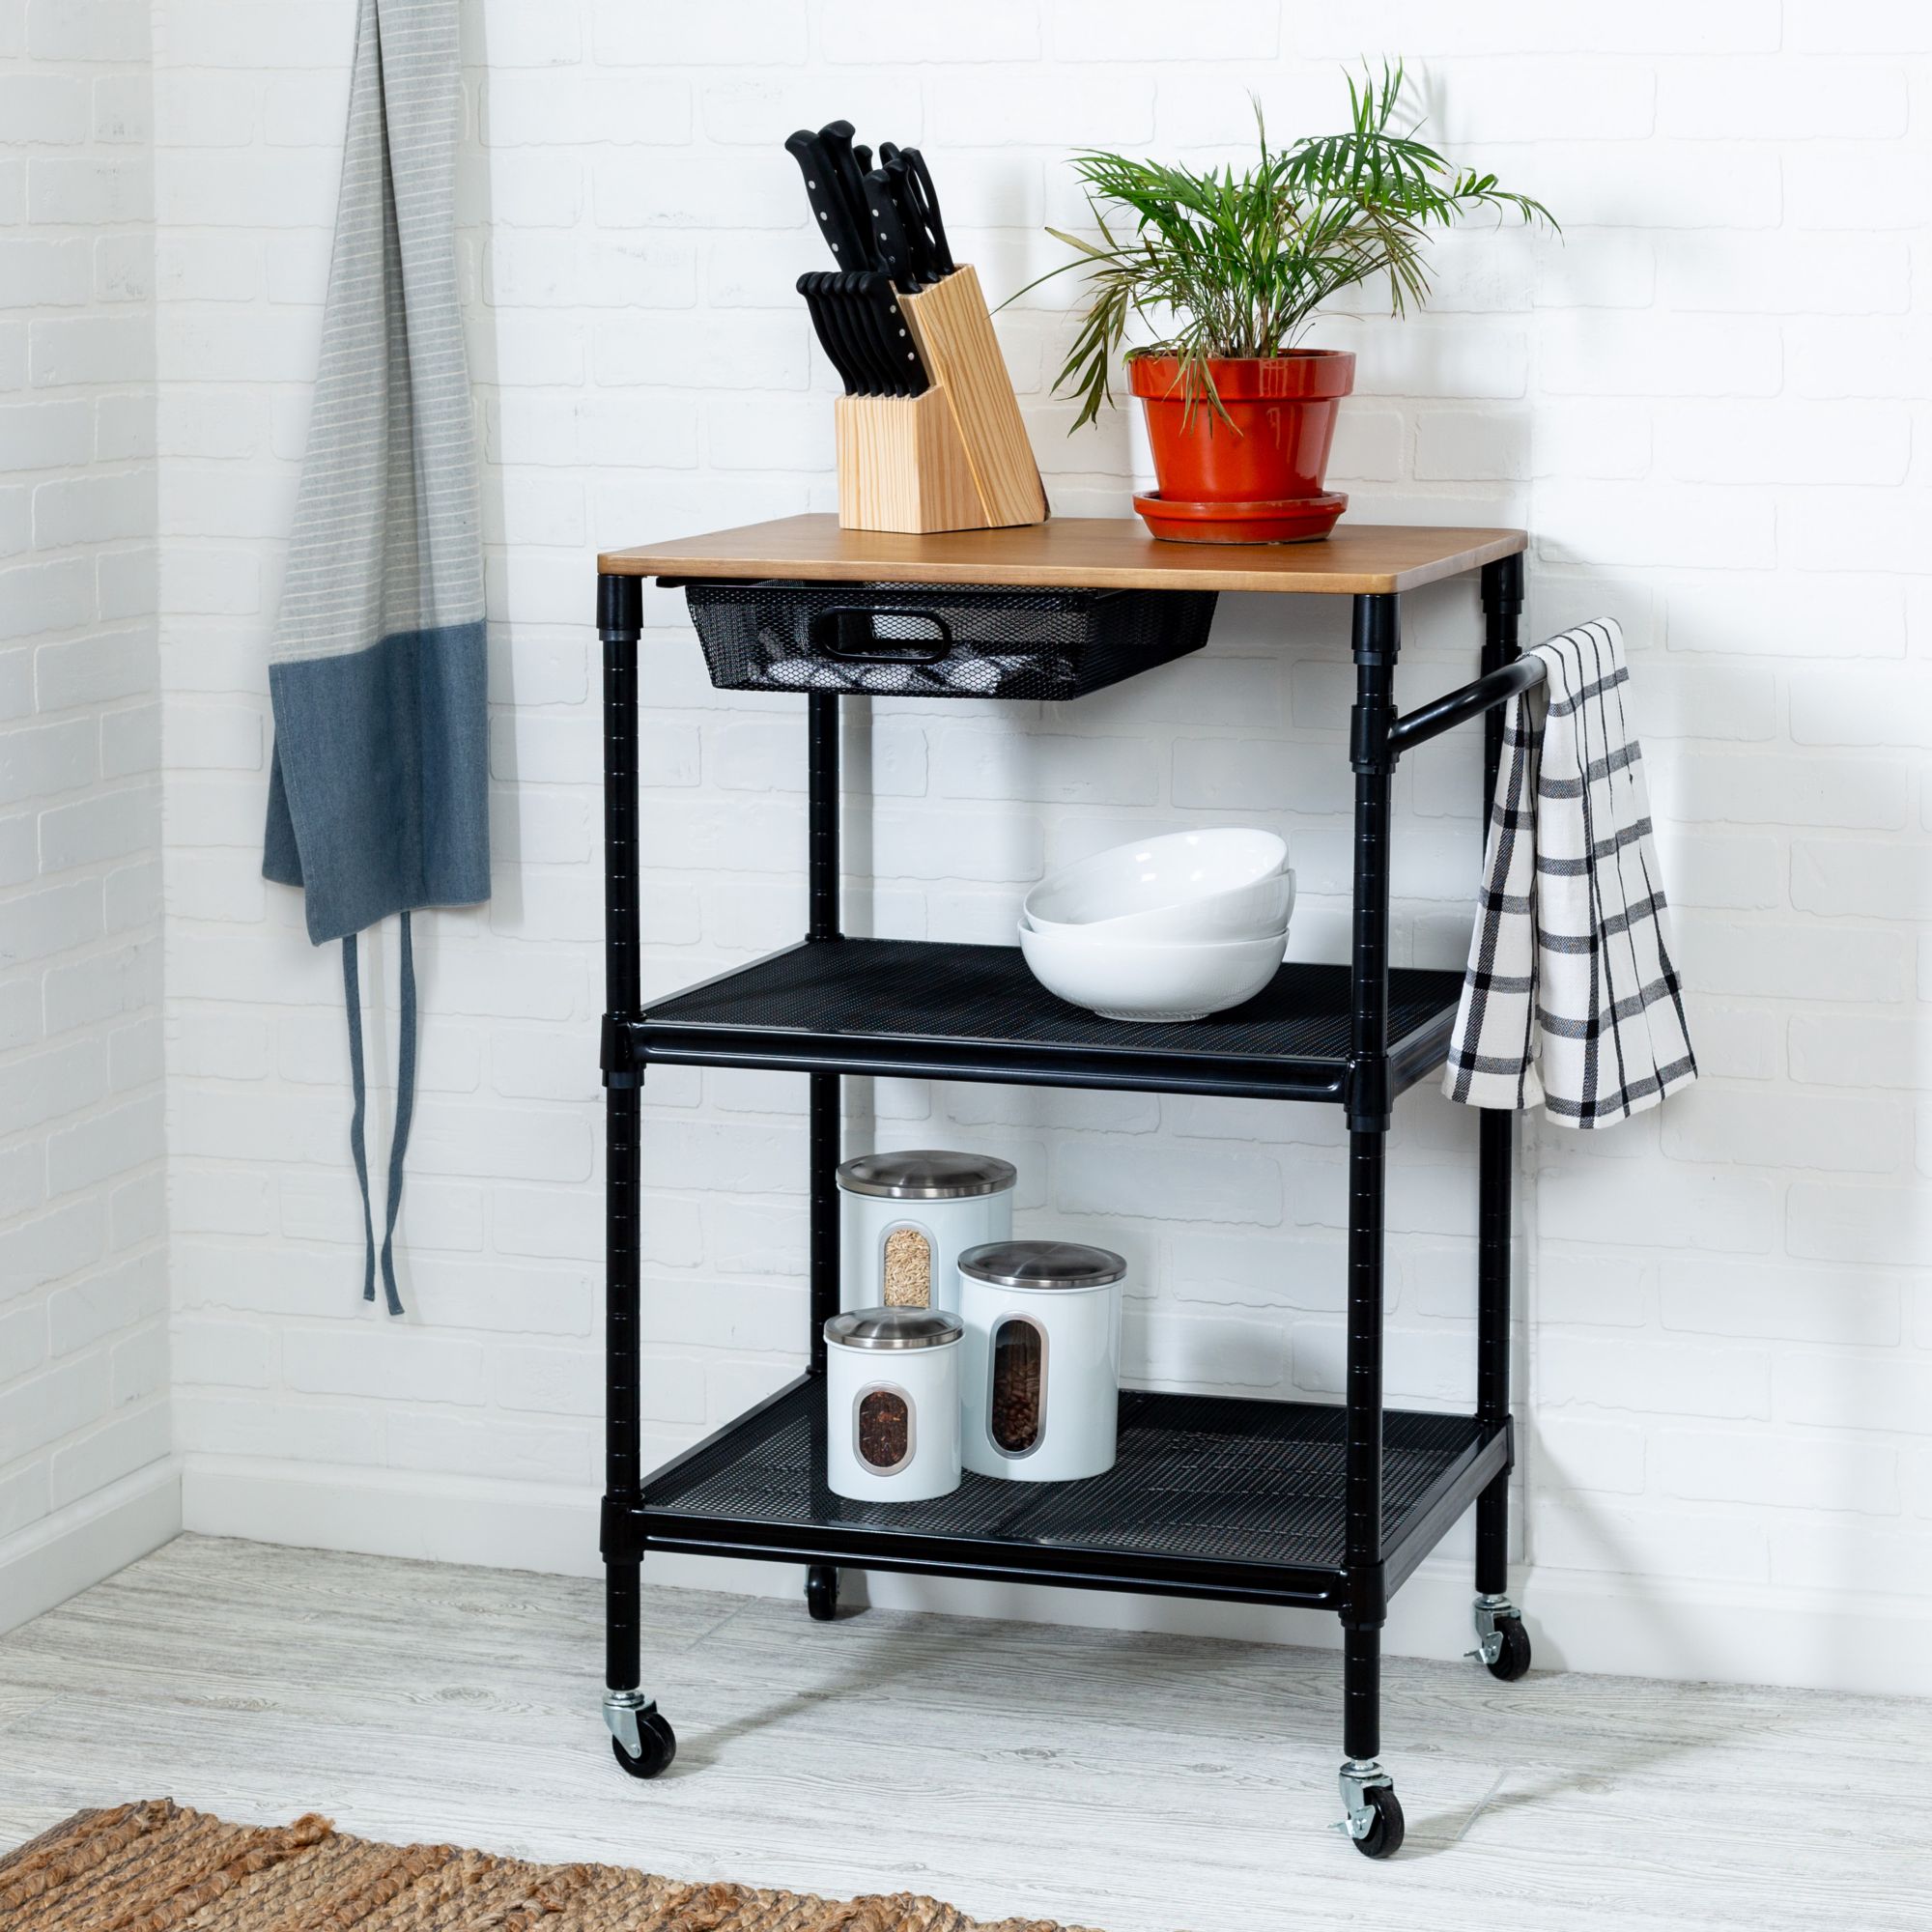 Honey-Can-Do 36 Kitchen Cart with Wheels, Storage Drawer and Handle -  Black